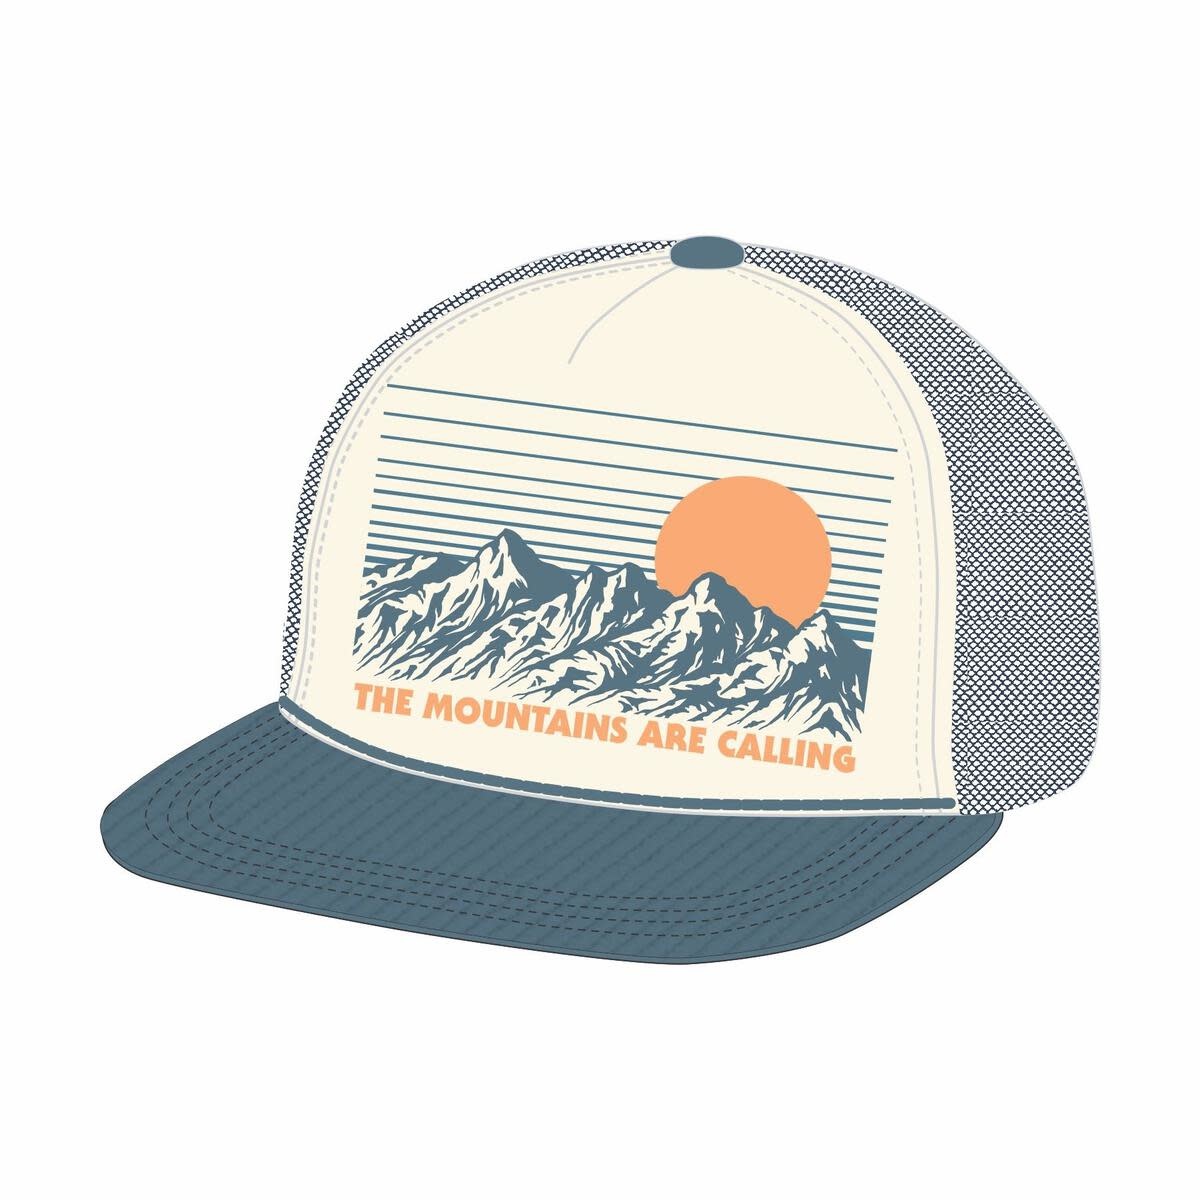 Tiny Whales Tiny Whales Mountains Are Calling Trucker Hat - River Blue/Natural